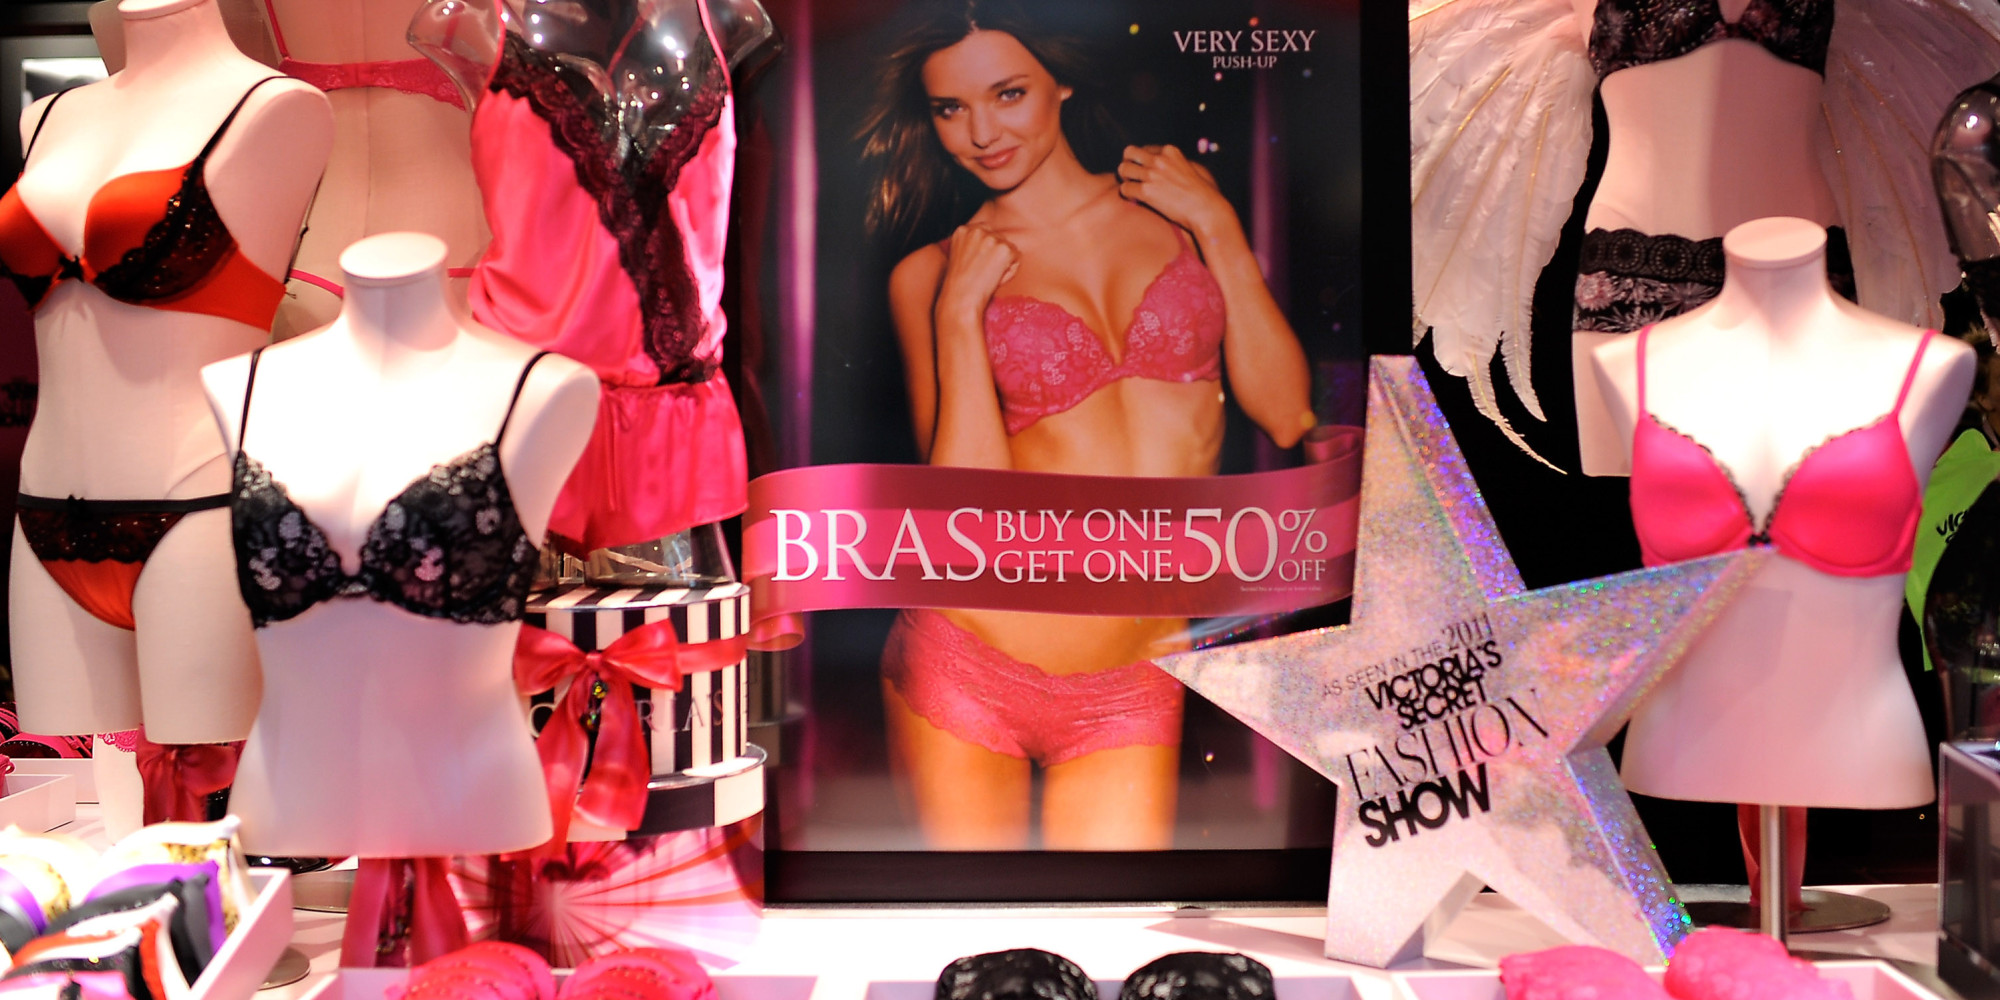 5 Things Men Should Know About Buying Lingerie According To Victorias